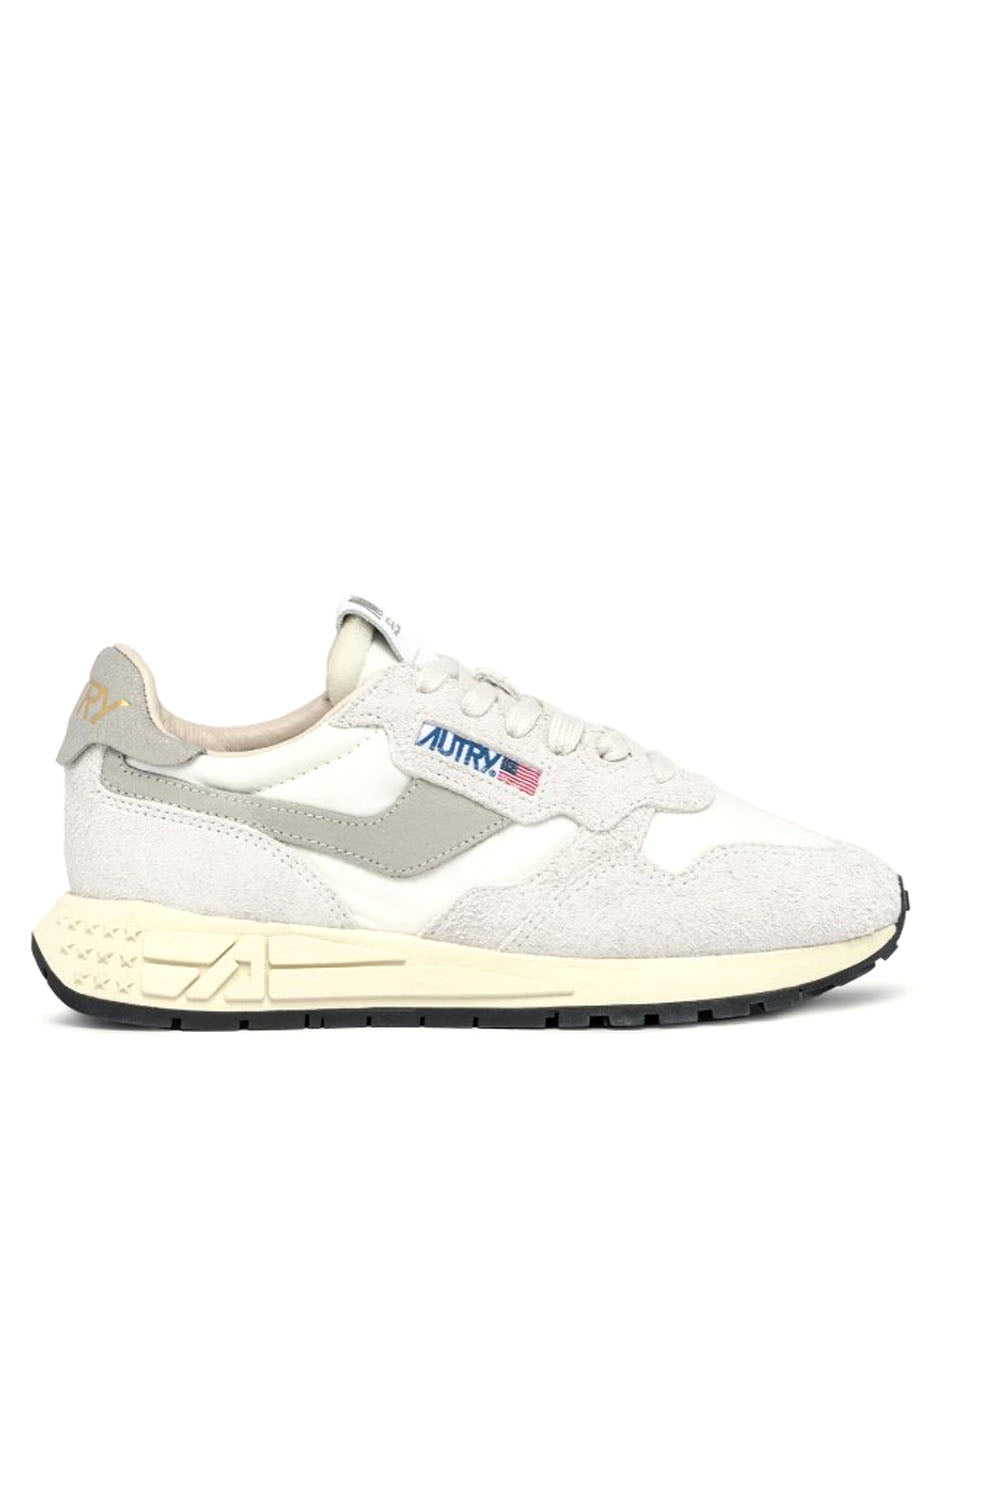  Autry Sneakers Reelwind Bianco Uomo - 1